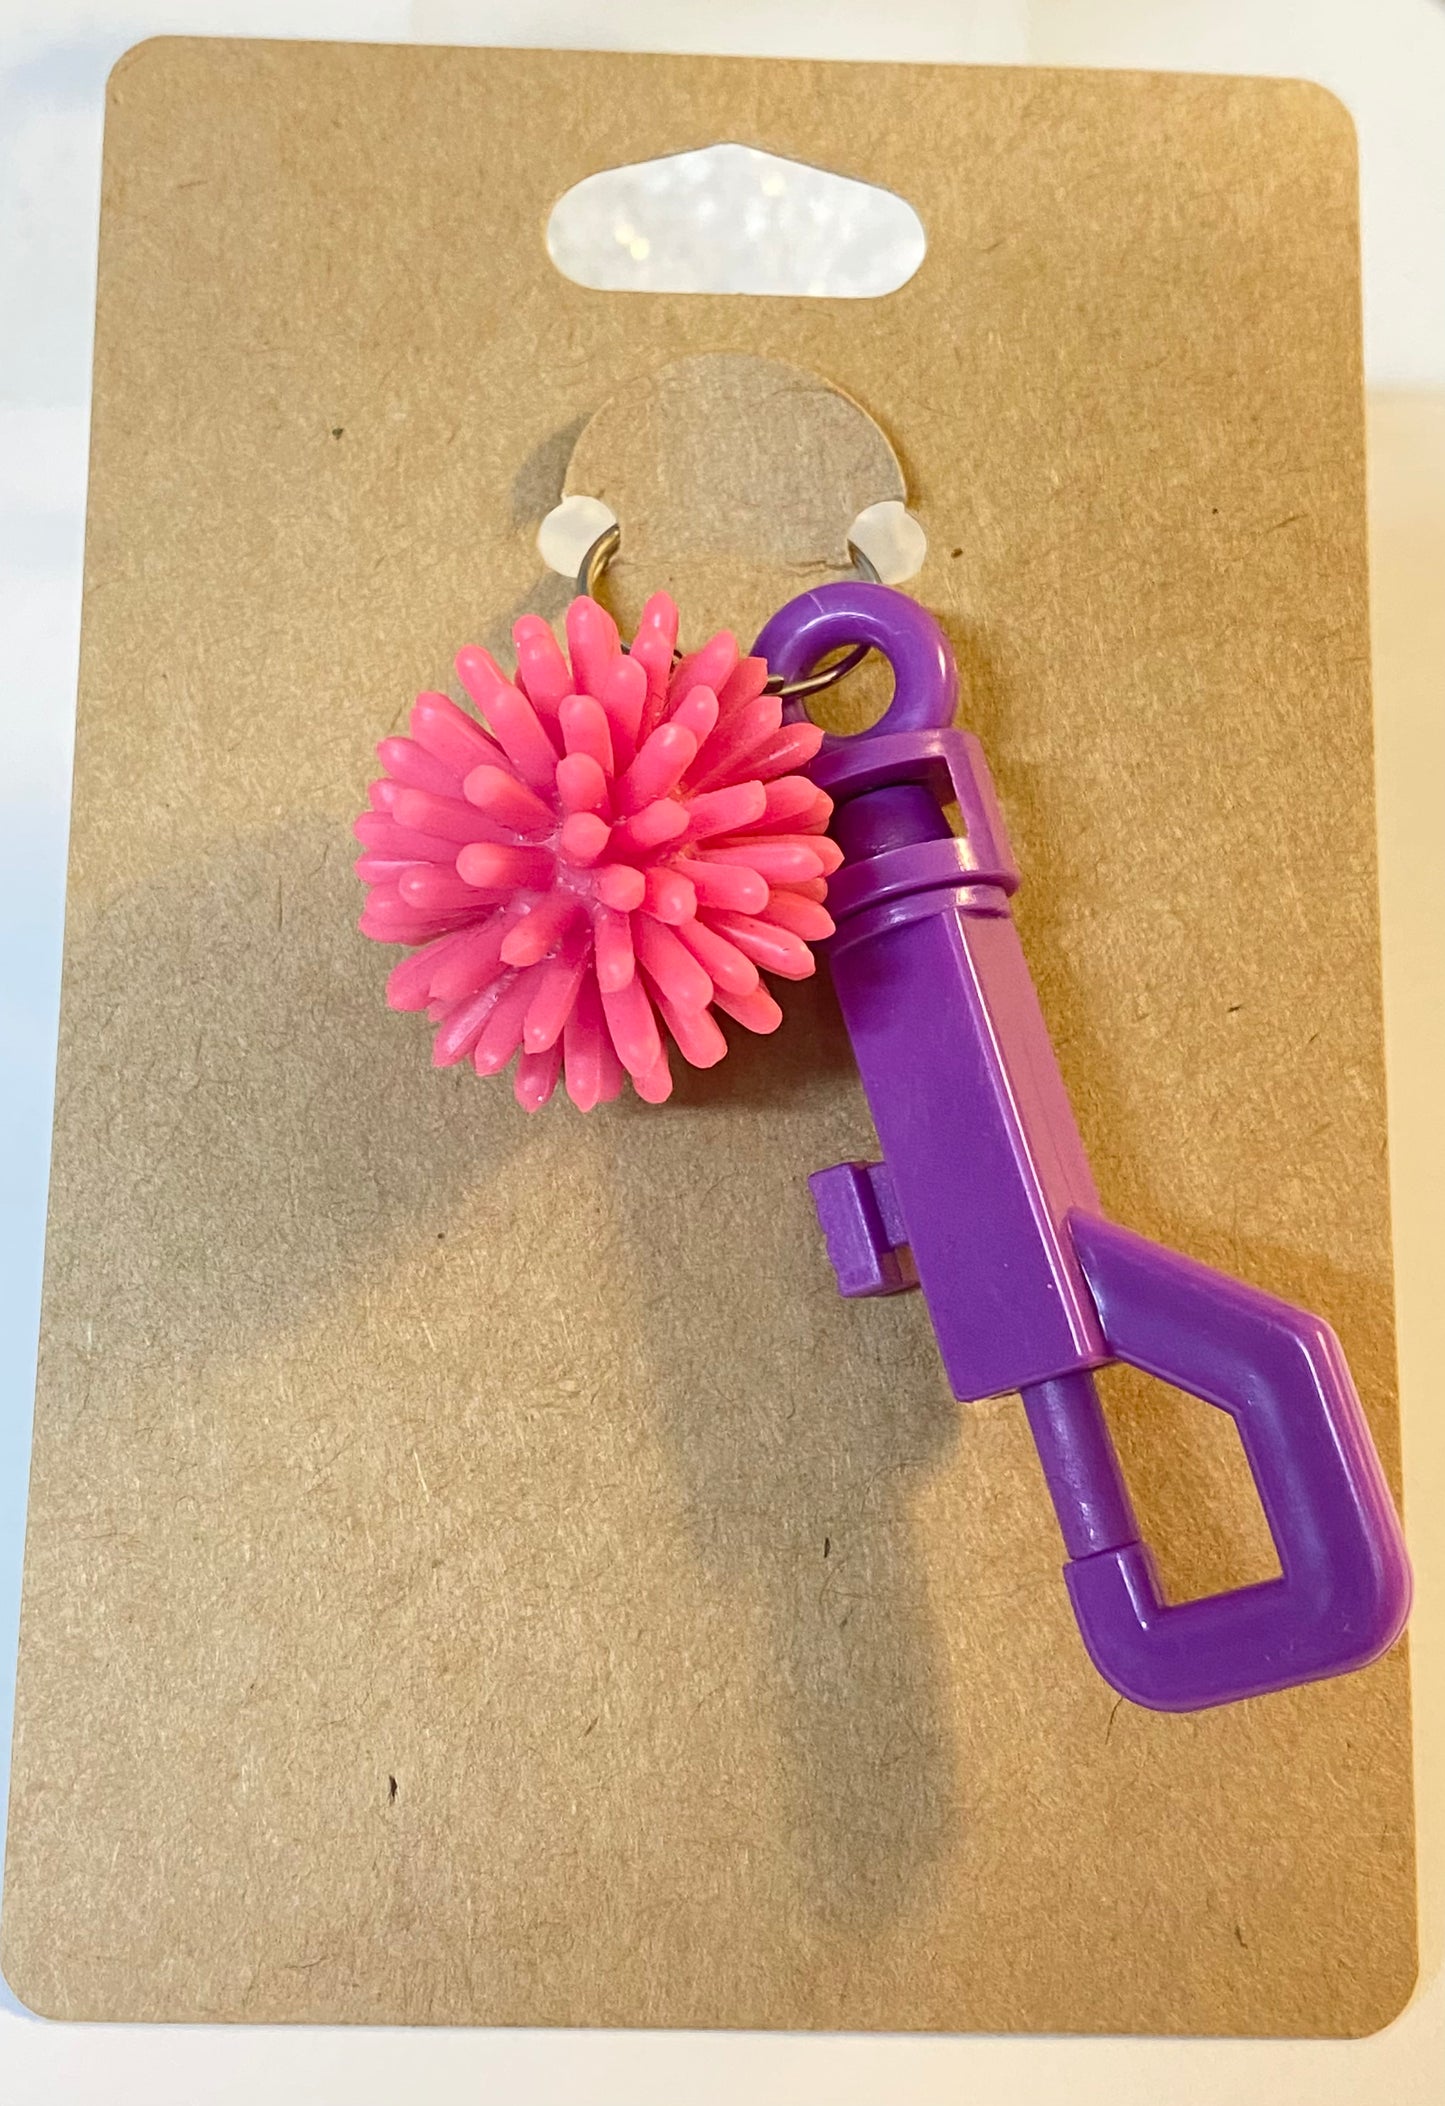 Rubber Spike Ball Charm Backpack Clips